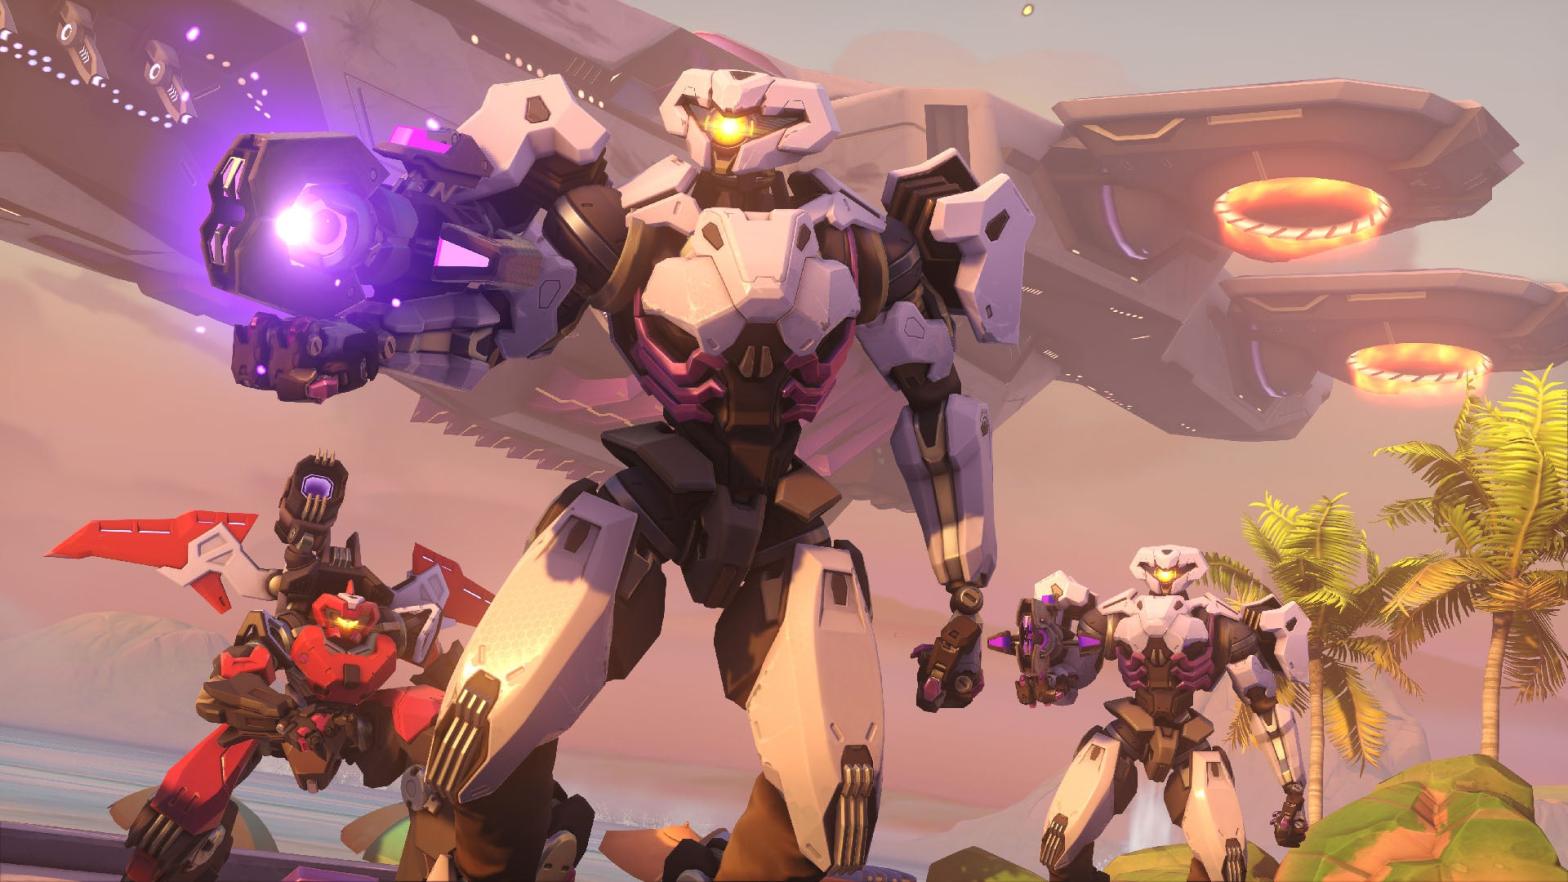 Overwatch 2, which was first revealed in 2019, was recently delayed. (Image: Blizzard)